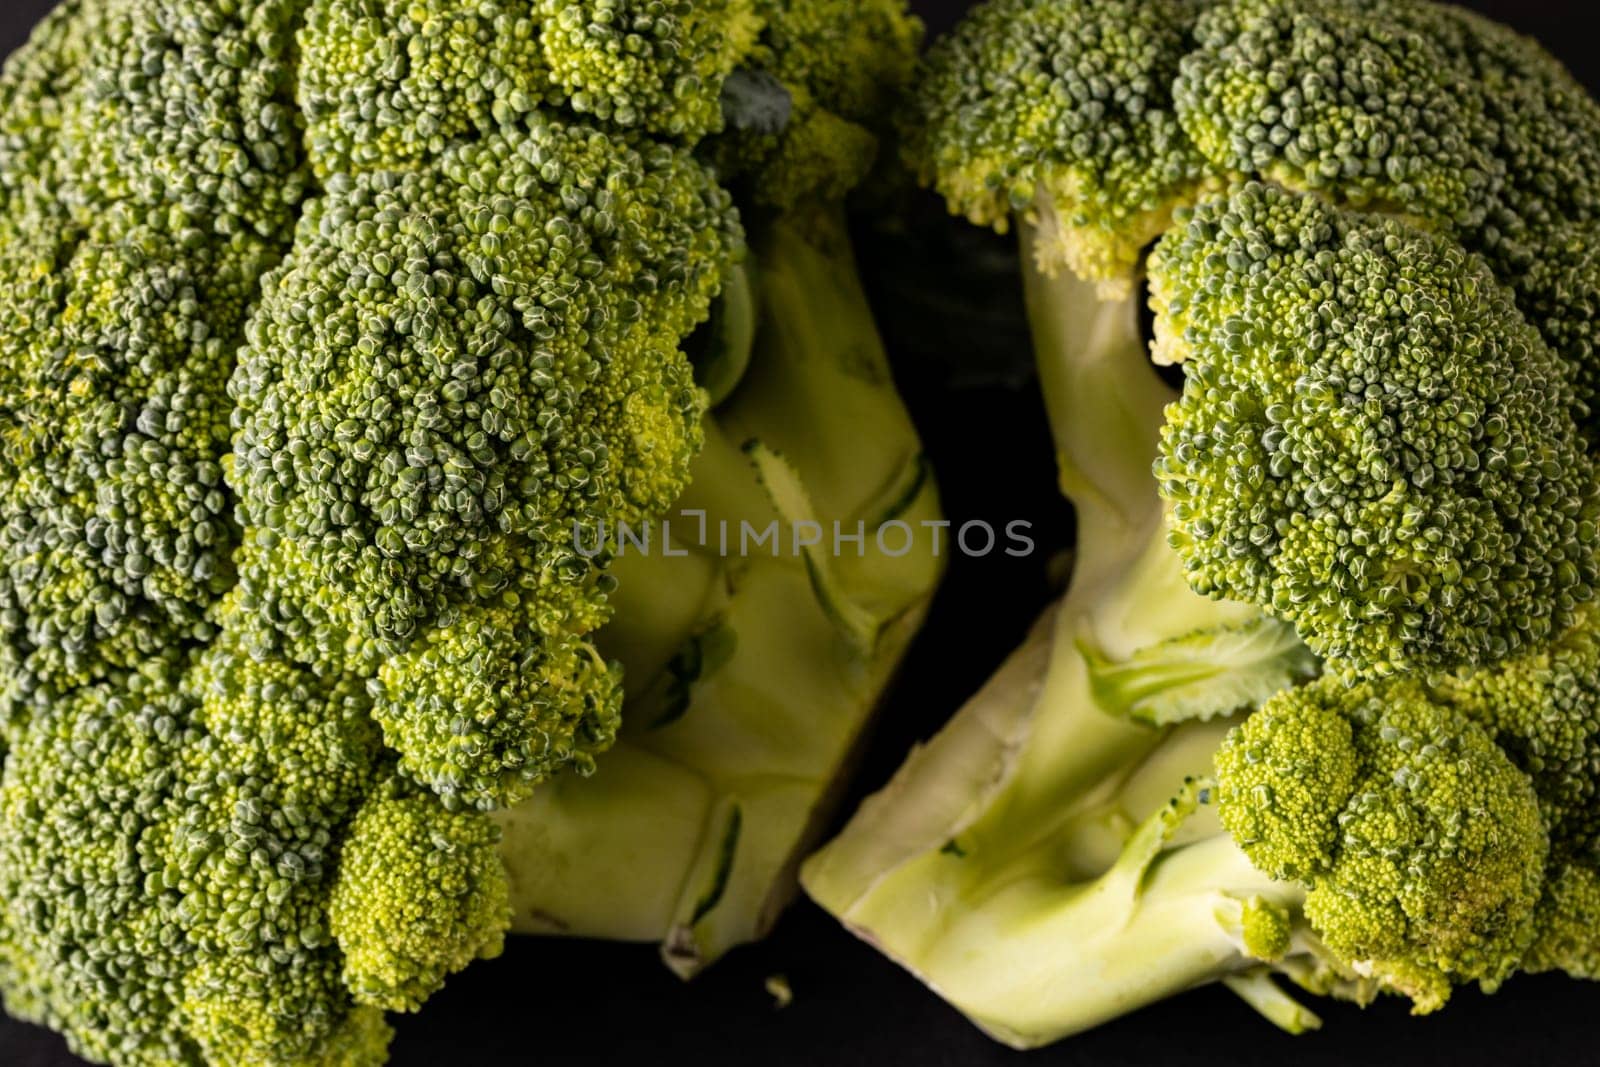 Extreme close-up of fresh green broccolis by Wavebreakmedia